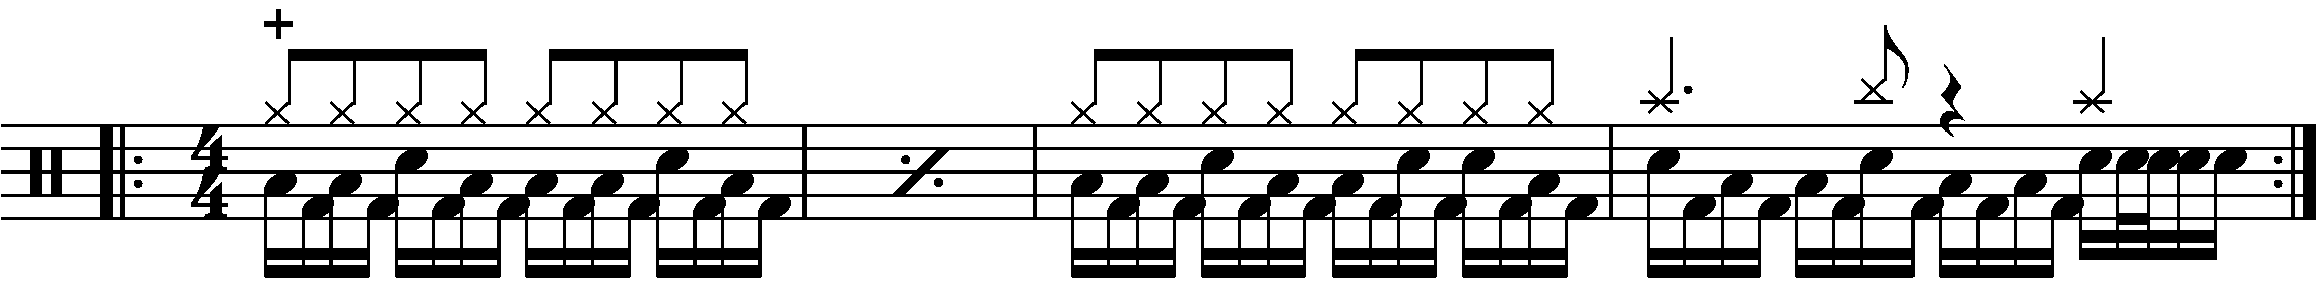 A four bar phrase based on the fake double kick groove concept